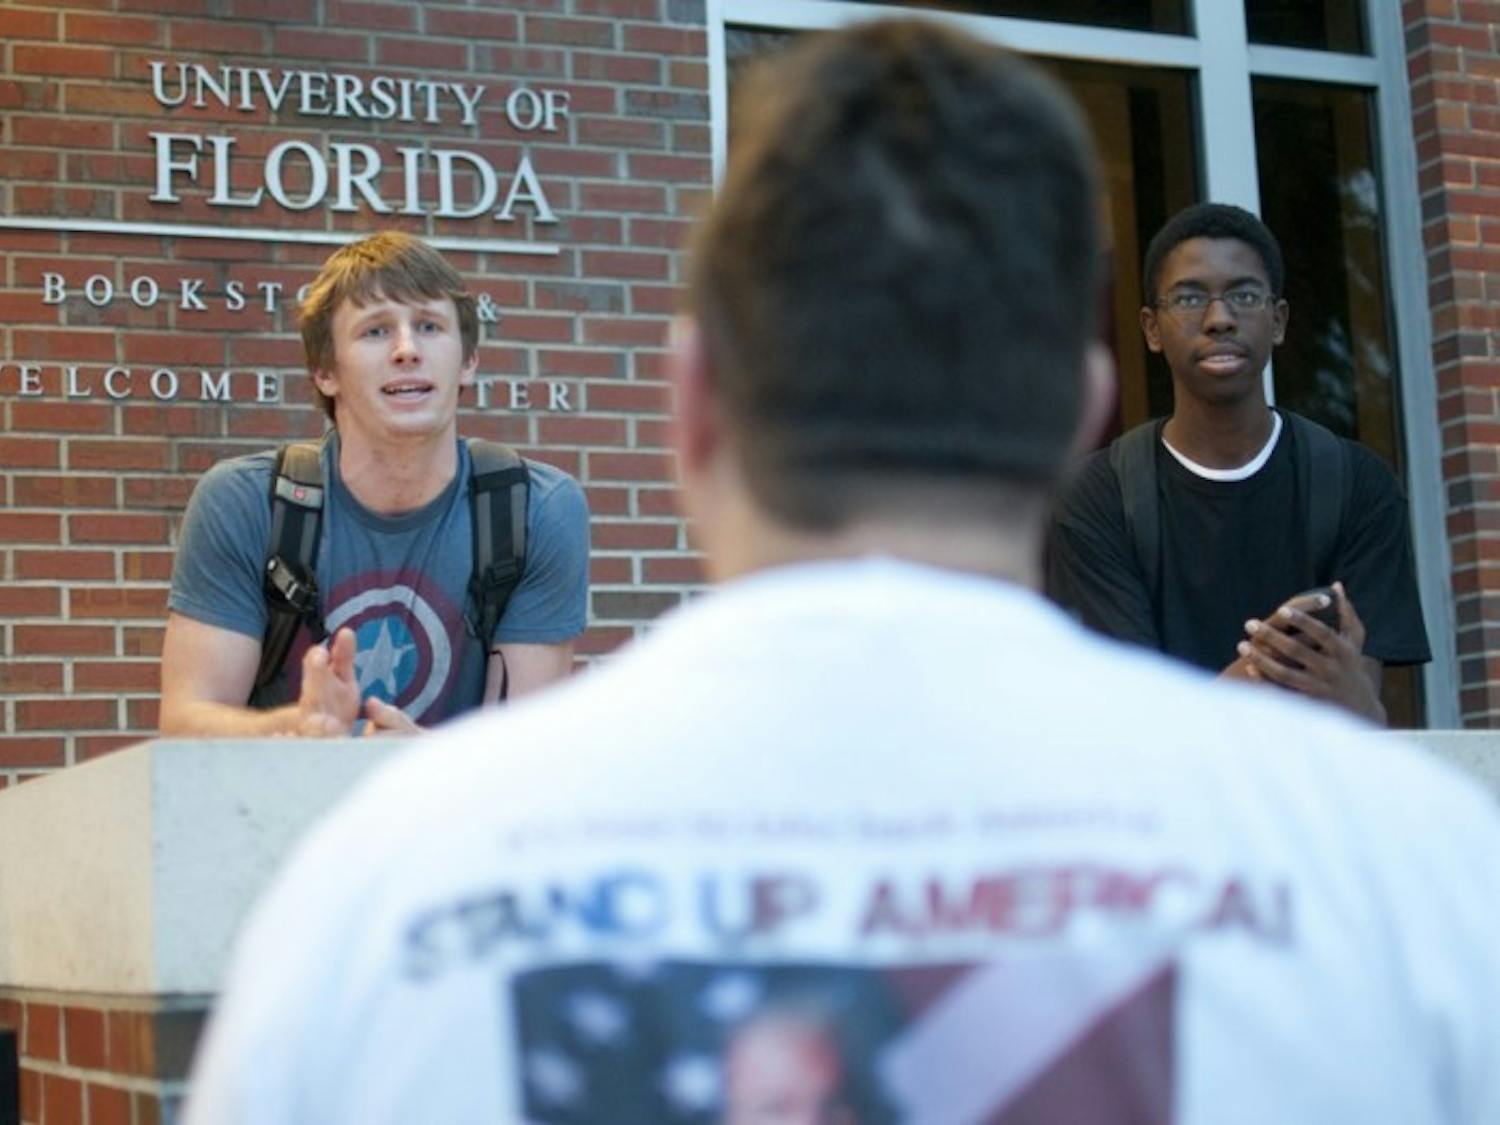 Matthew Tayon, 20, a junior biochemistry major, debates with a protester outside the UF bookstore on Thursday evening.